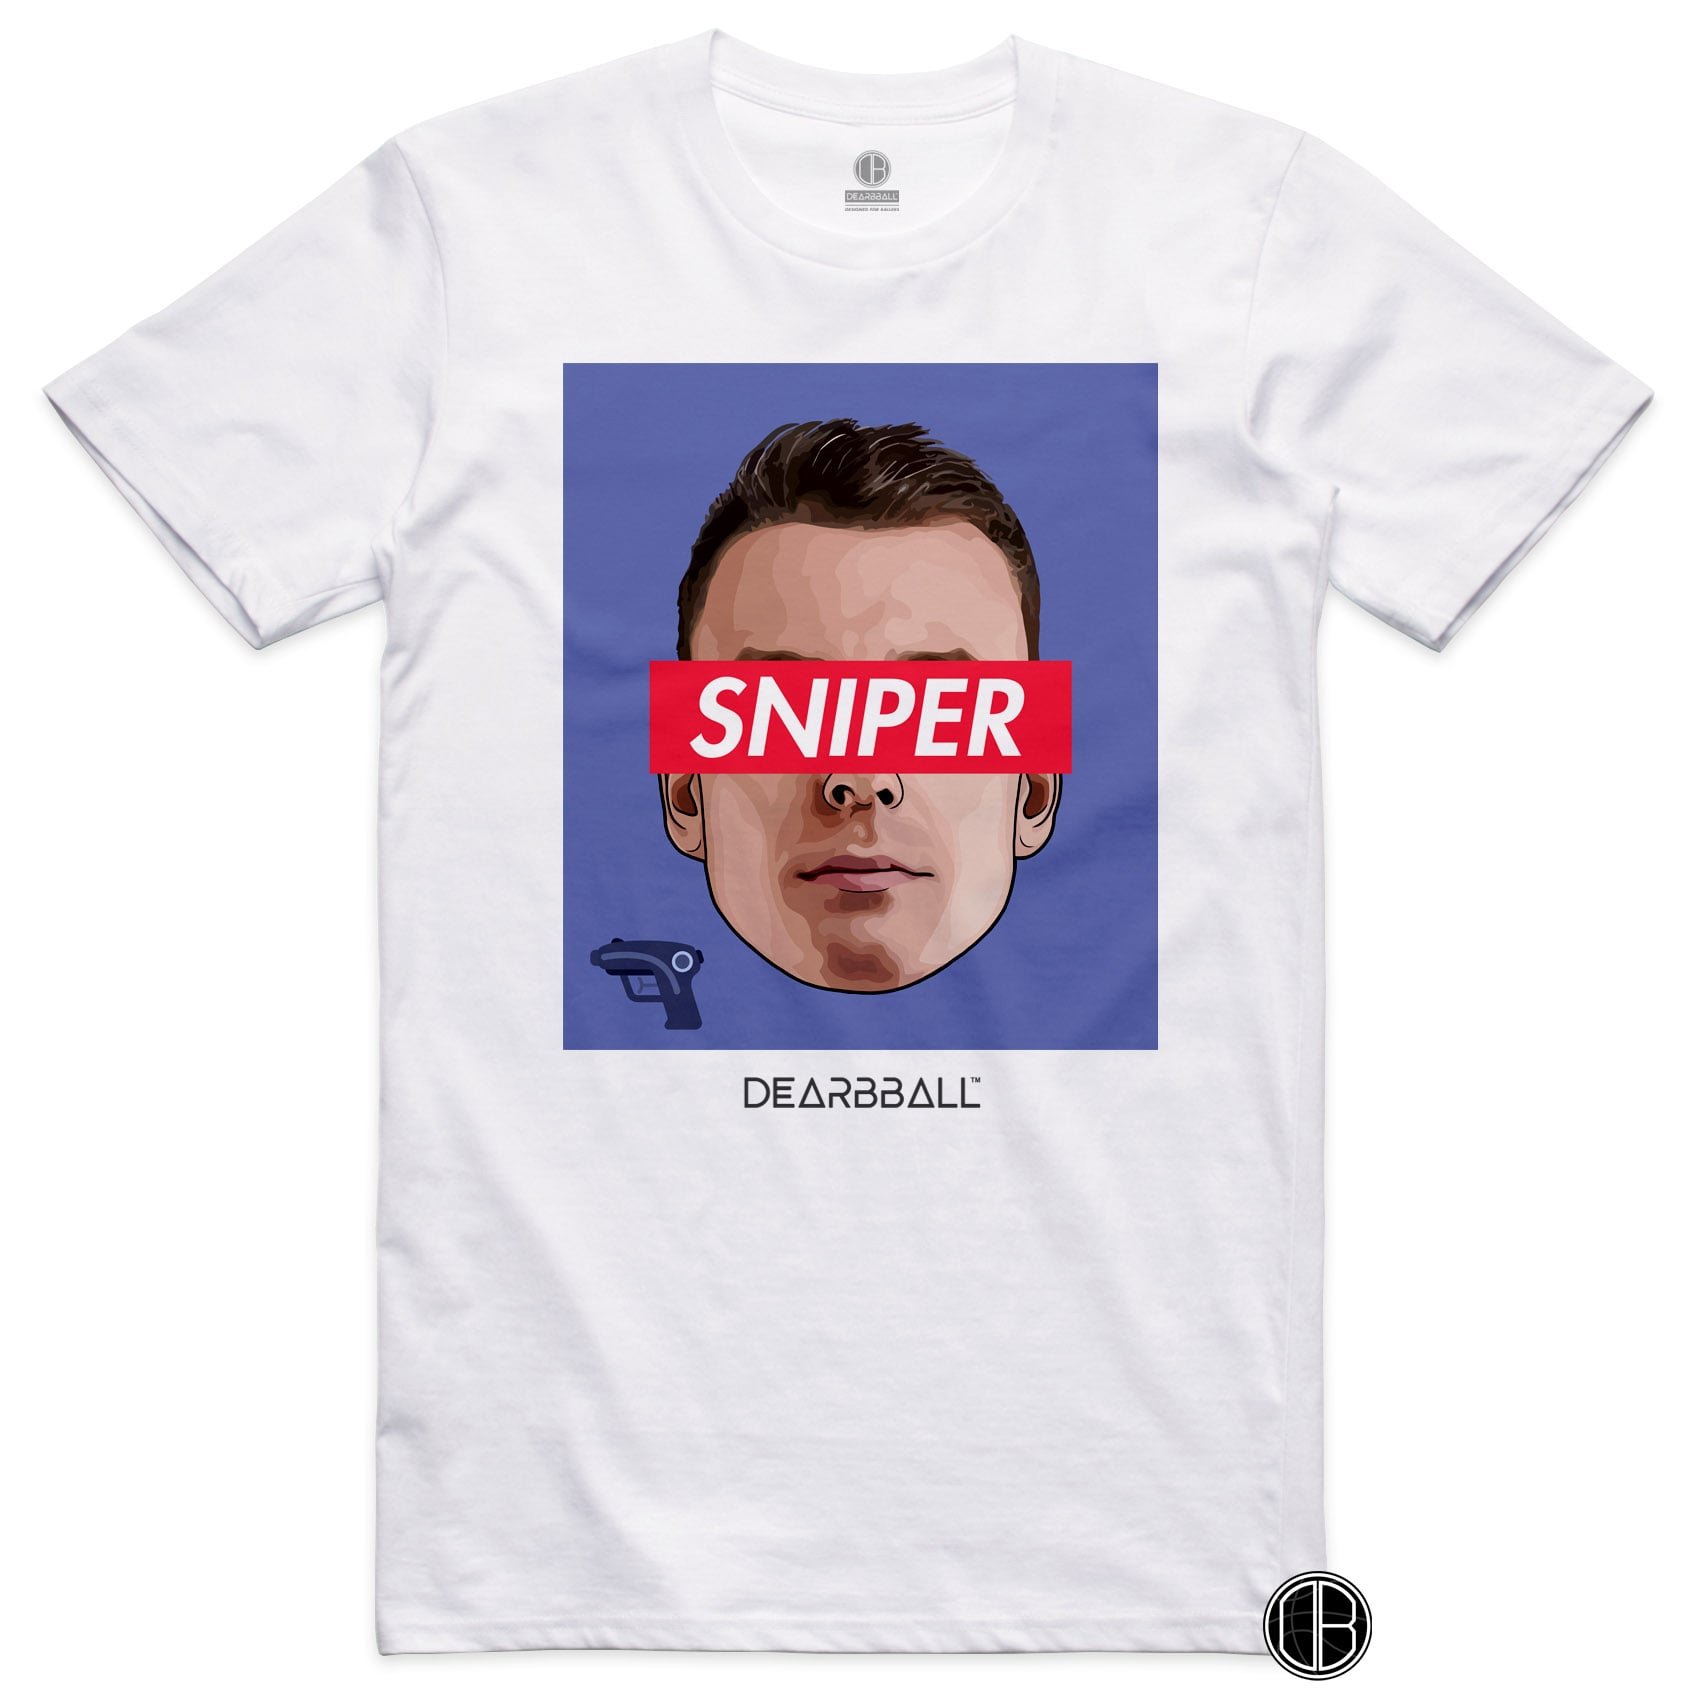 [ENFANT] DearBBall T-Shirt - SNIPER Red Edition